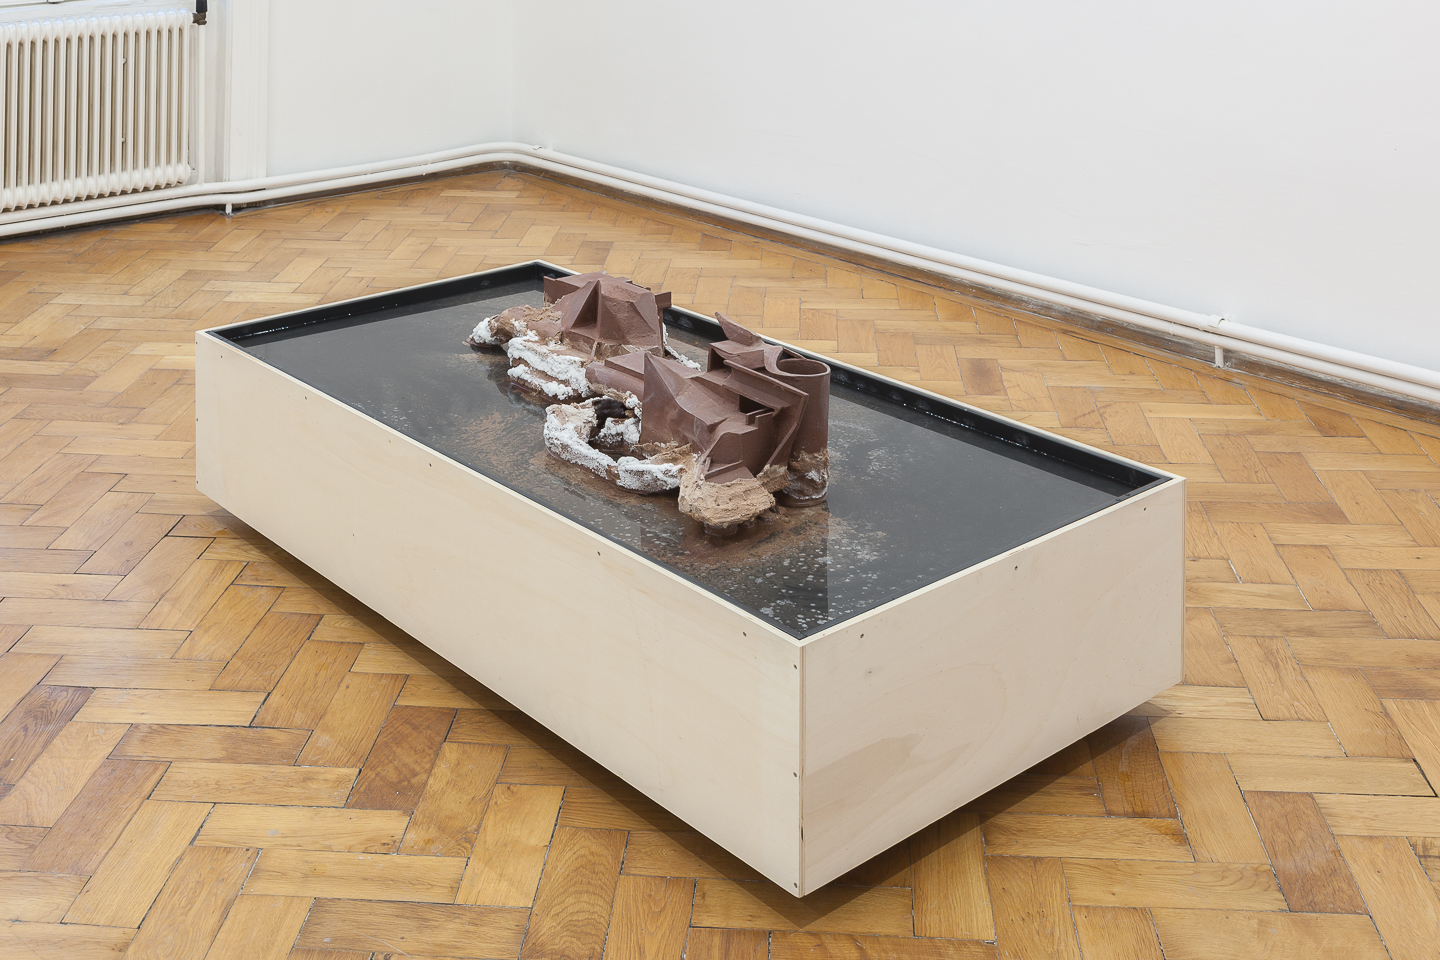 Laurence Sturla*1992 in Swindon, UKlives and works in ViennaBut all they found where tide lines III, 2020, Unglazed stoneware ceramic, raw clay, salt, bone meal, wood, PVC, water, metal fixings, 155 x 75 x 50 cm